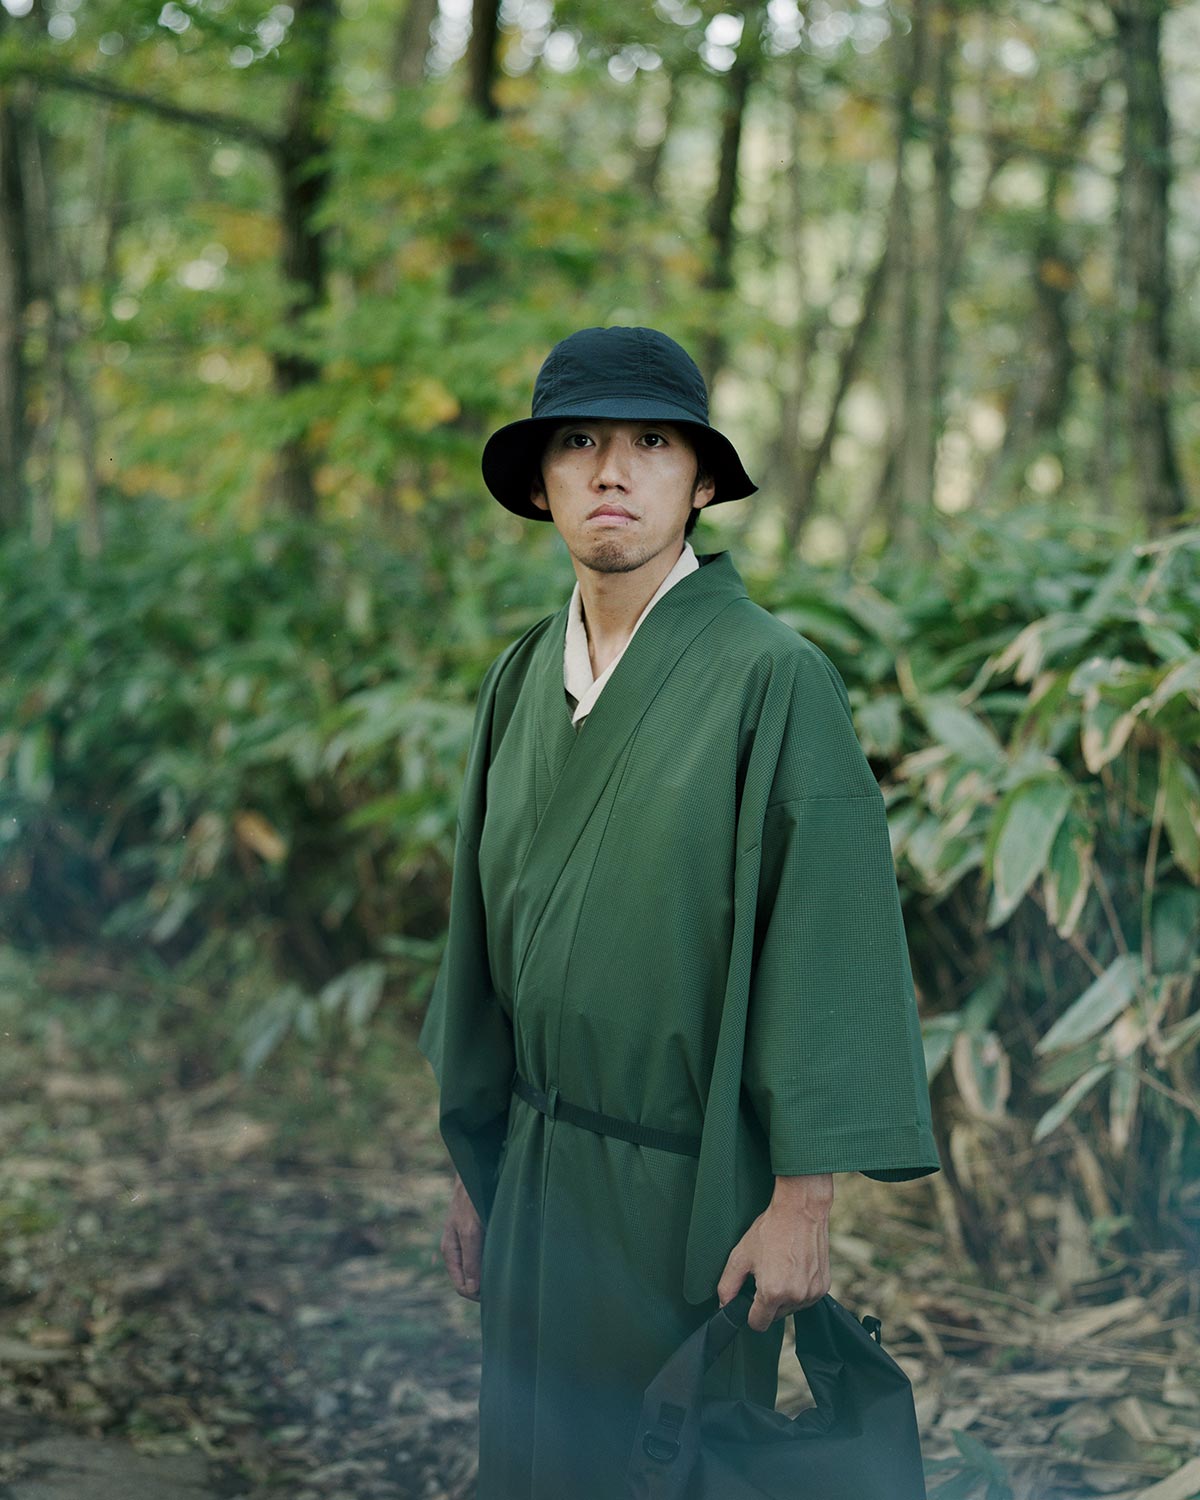 Camp like a samurai with the new Outdoor Kimono from Japanese apparel